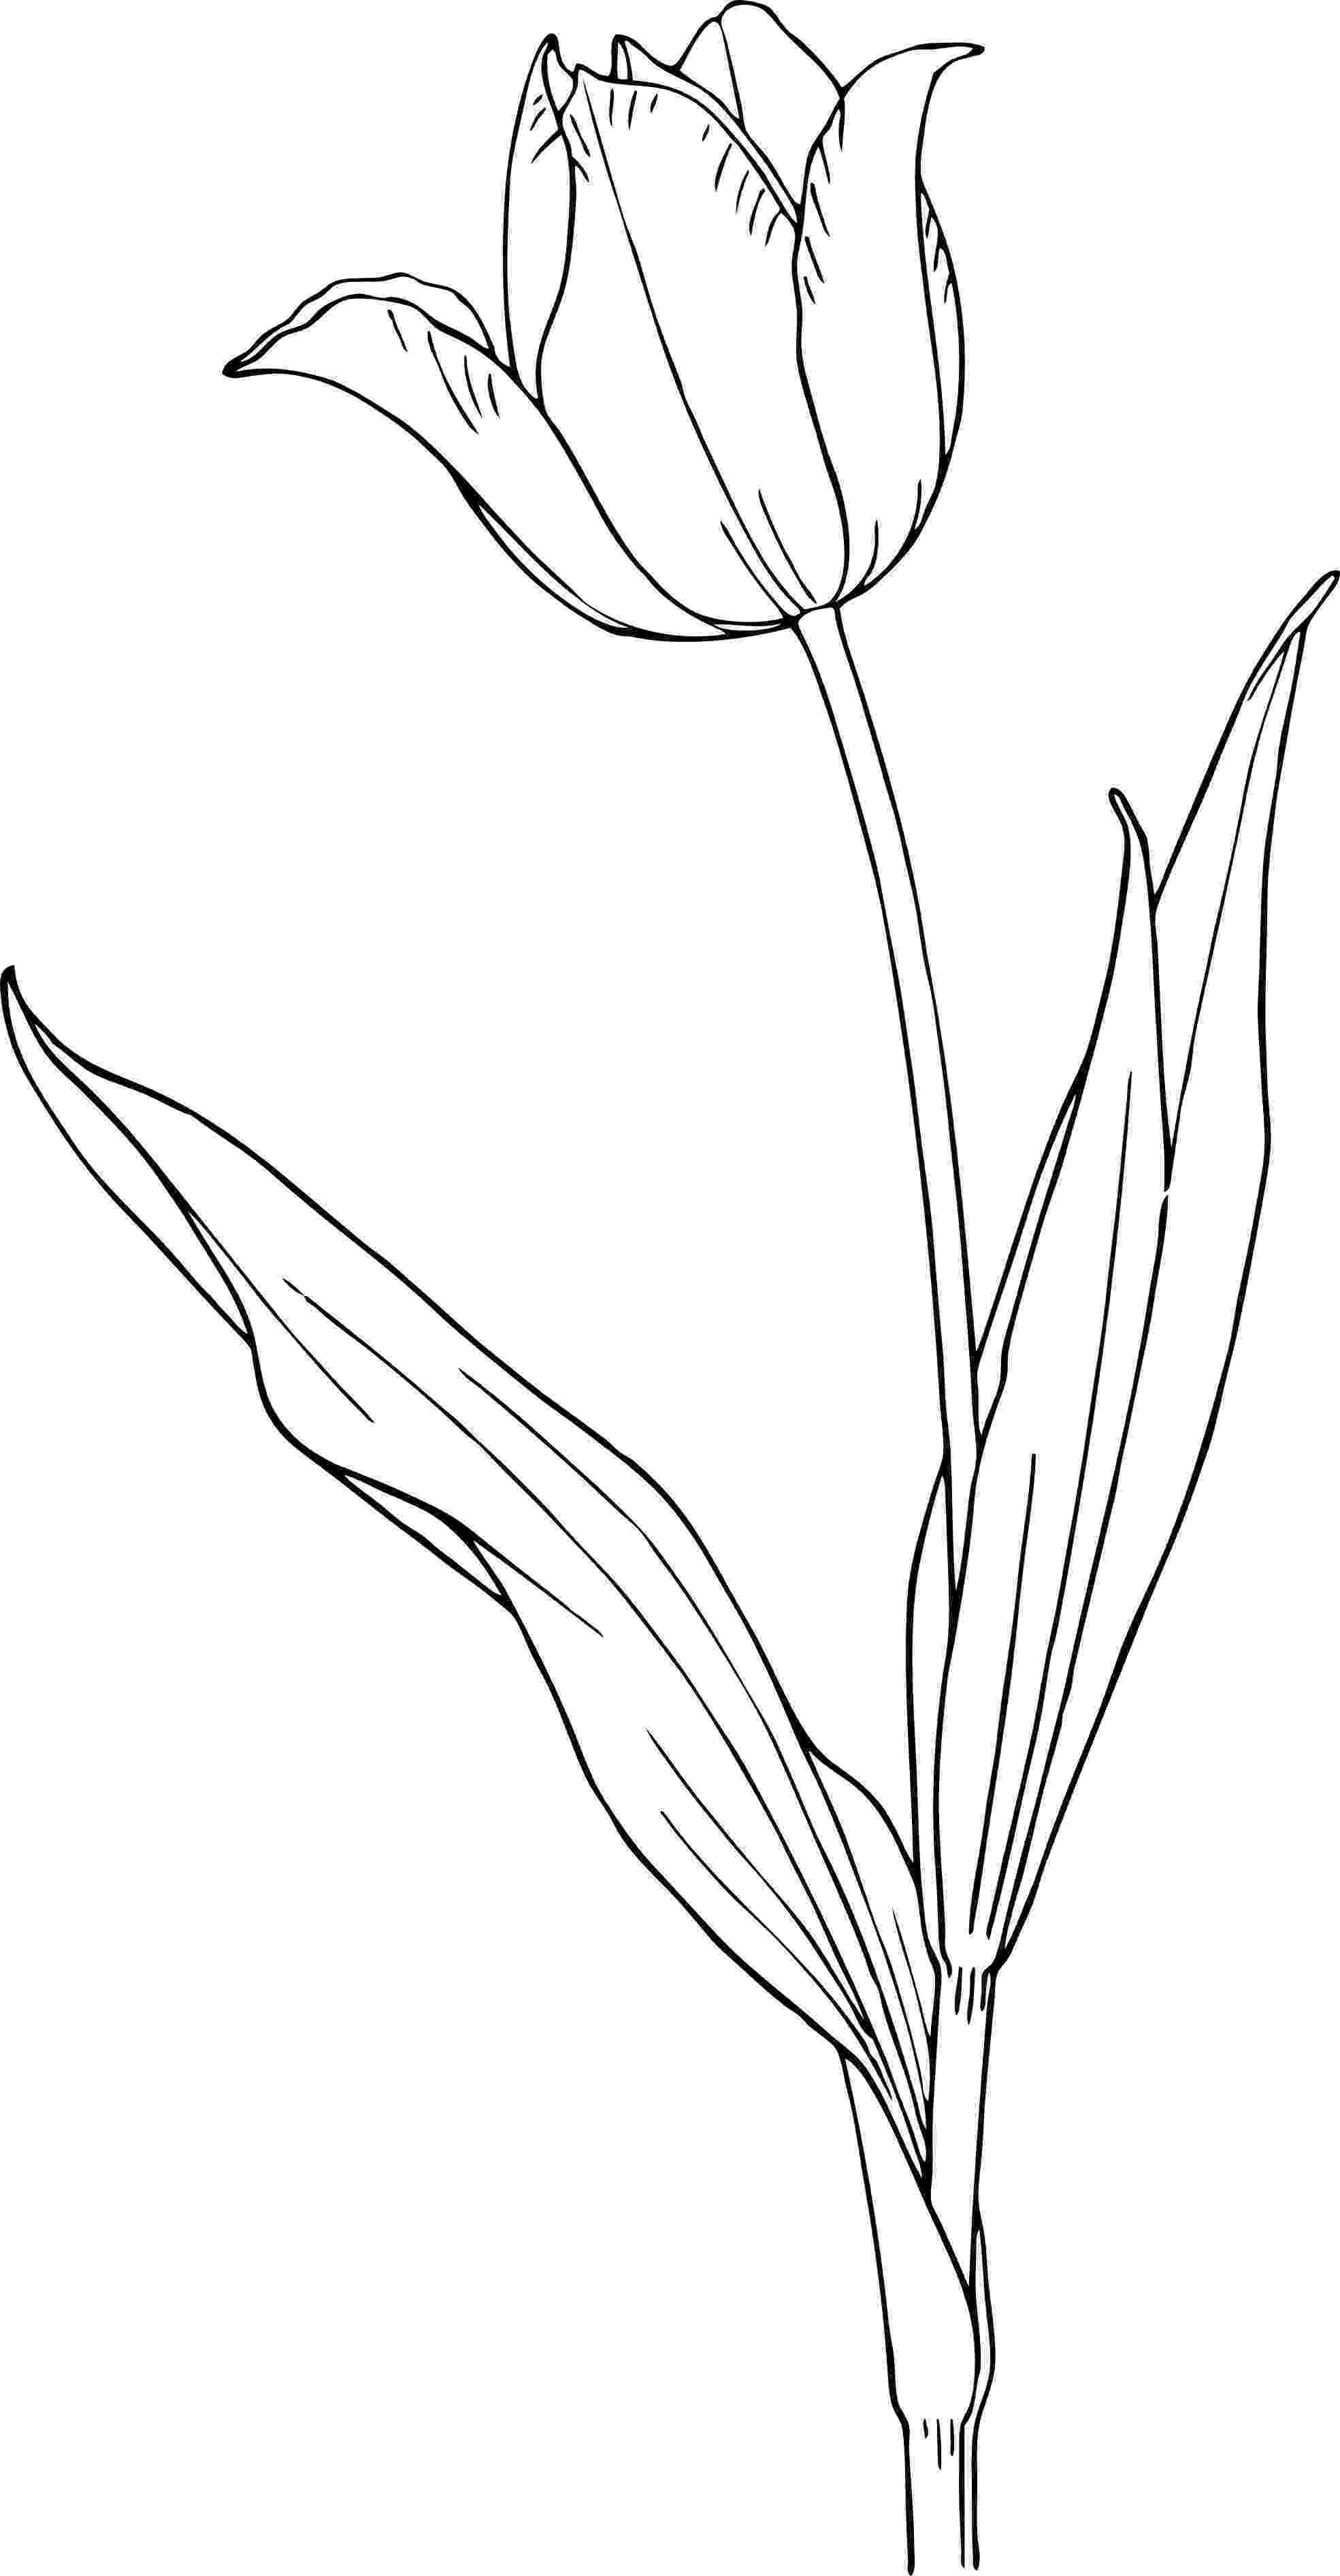 tulip pictures to color free printable tulip coloring pages for kids pictures color tulip to 1 1